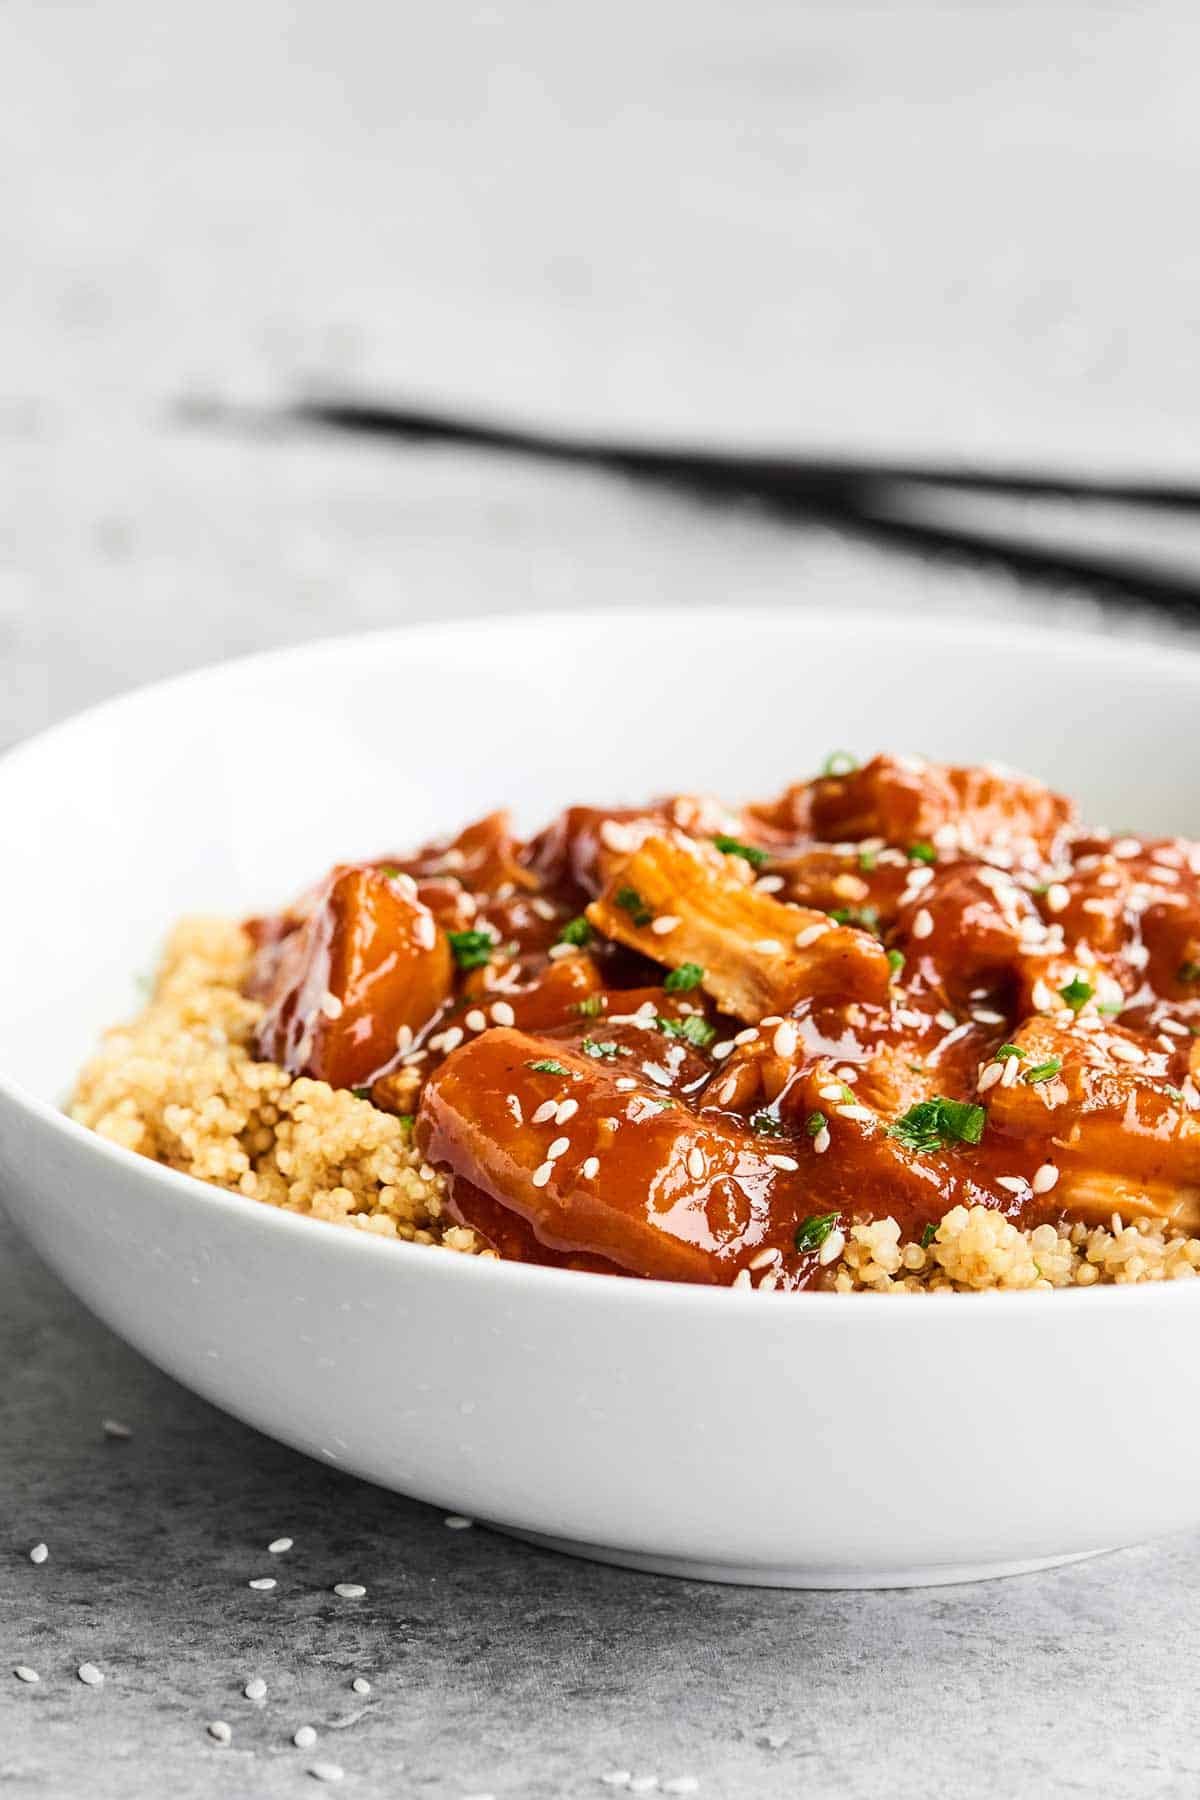 #ad This Slow Cooker Honey Sriracha Chicken is quick to put together, healthy, easy, and is the perfect combo of sweet and spicy thanks to honey and sriracha! showmetheyummy.com @tablespoon #honey #sriracha #slowcooker #chicken